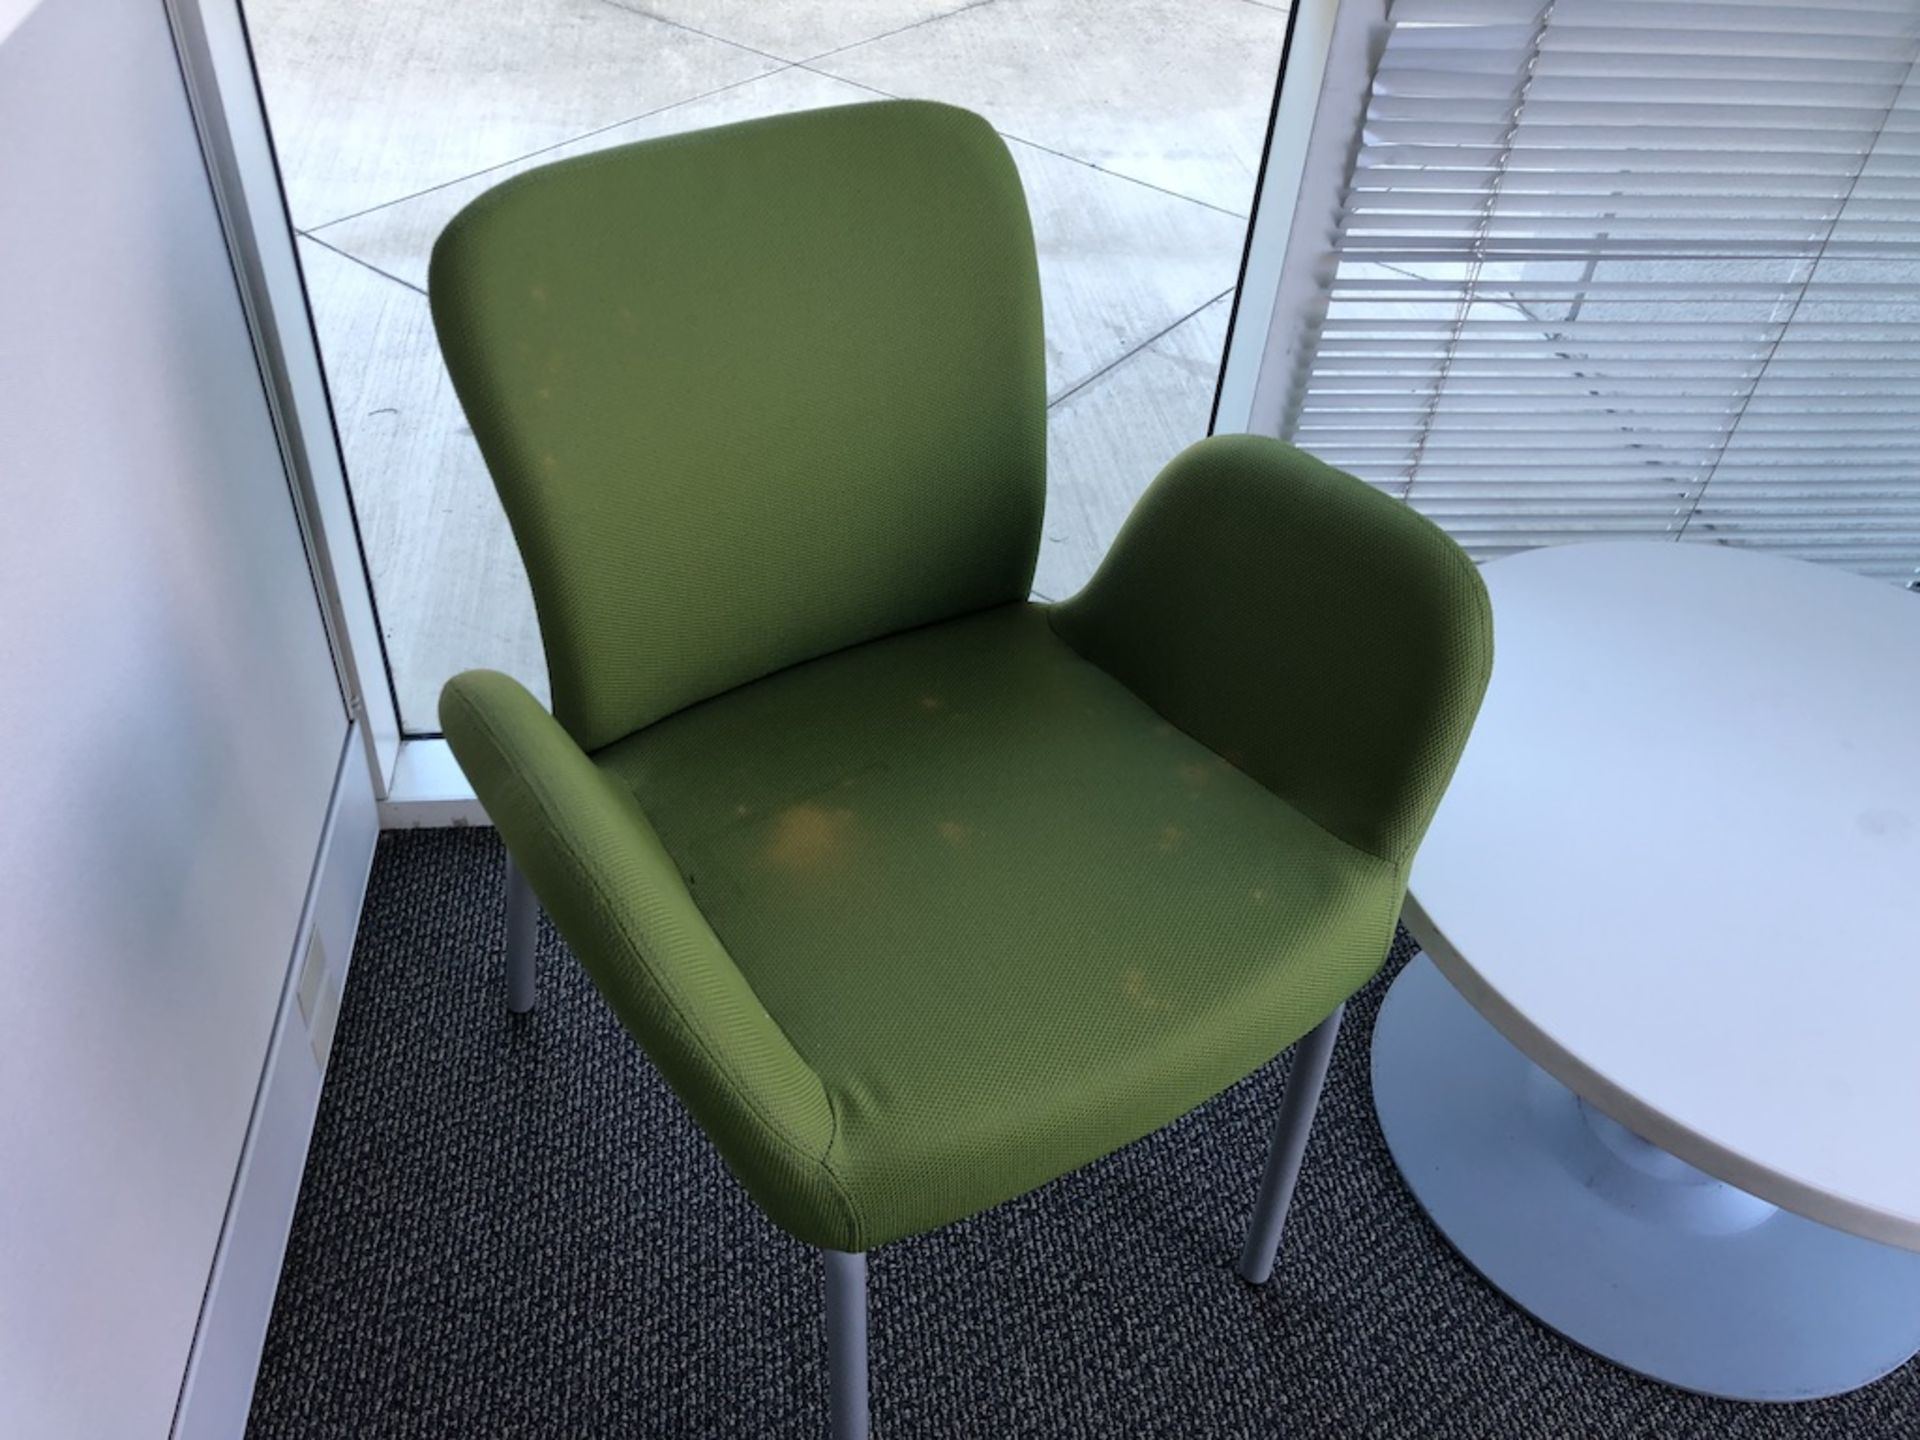 GREEN CUSHION PADDED CHAIR   SCHNEIDER ELECTRIC- 6611 PRESTON AVE SUITE A - Image 2 of 3